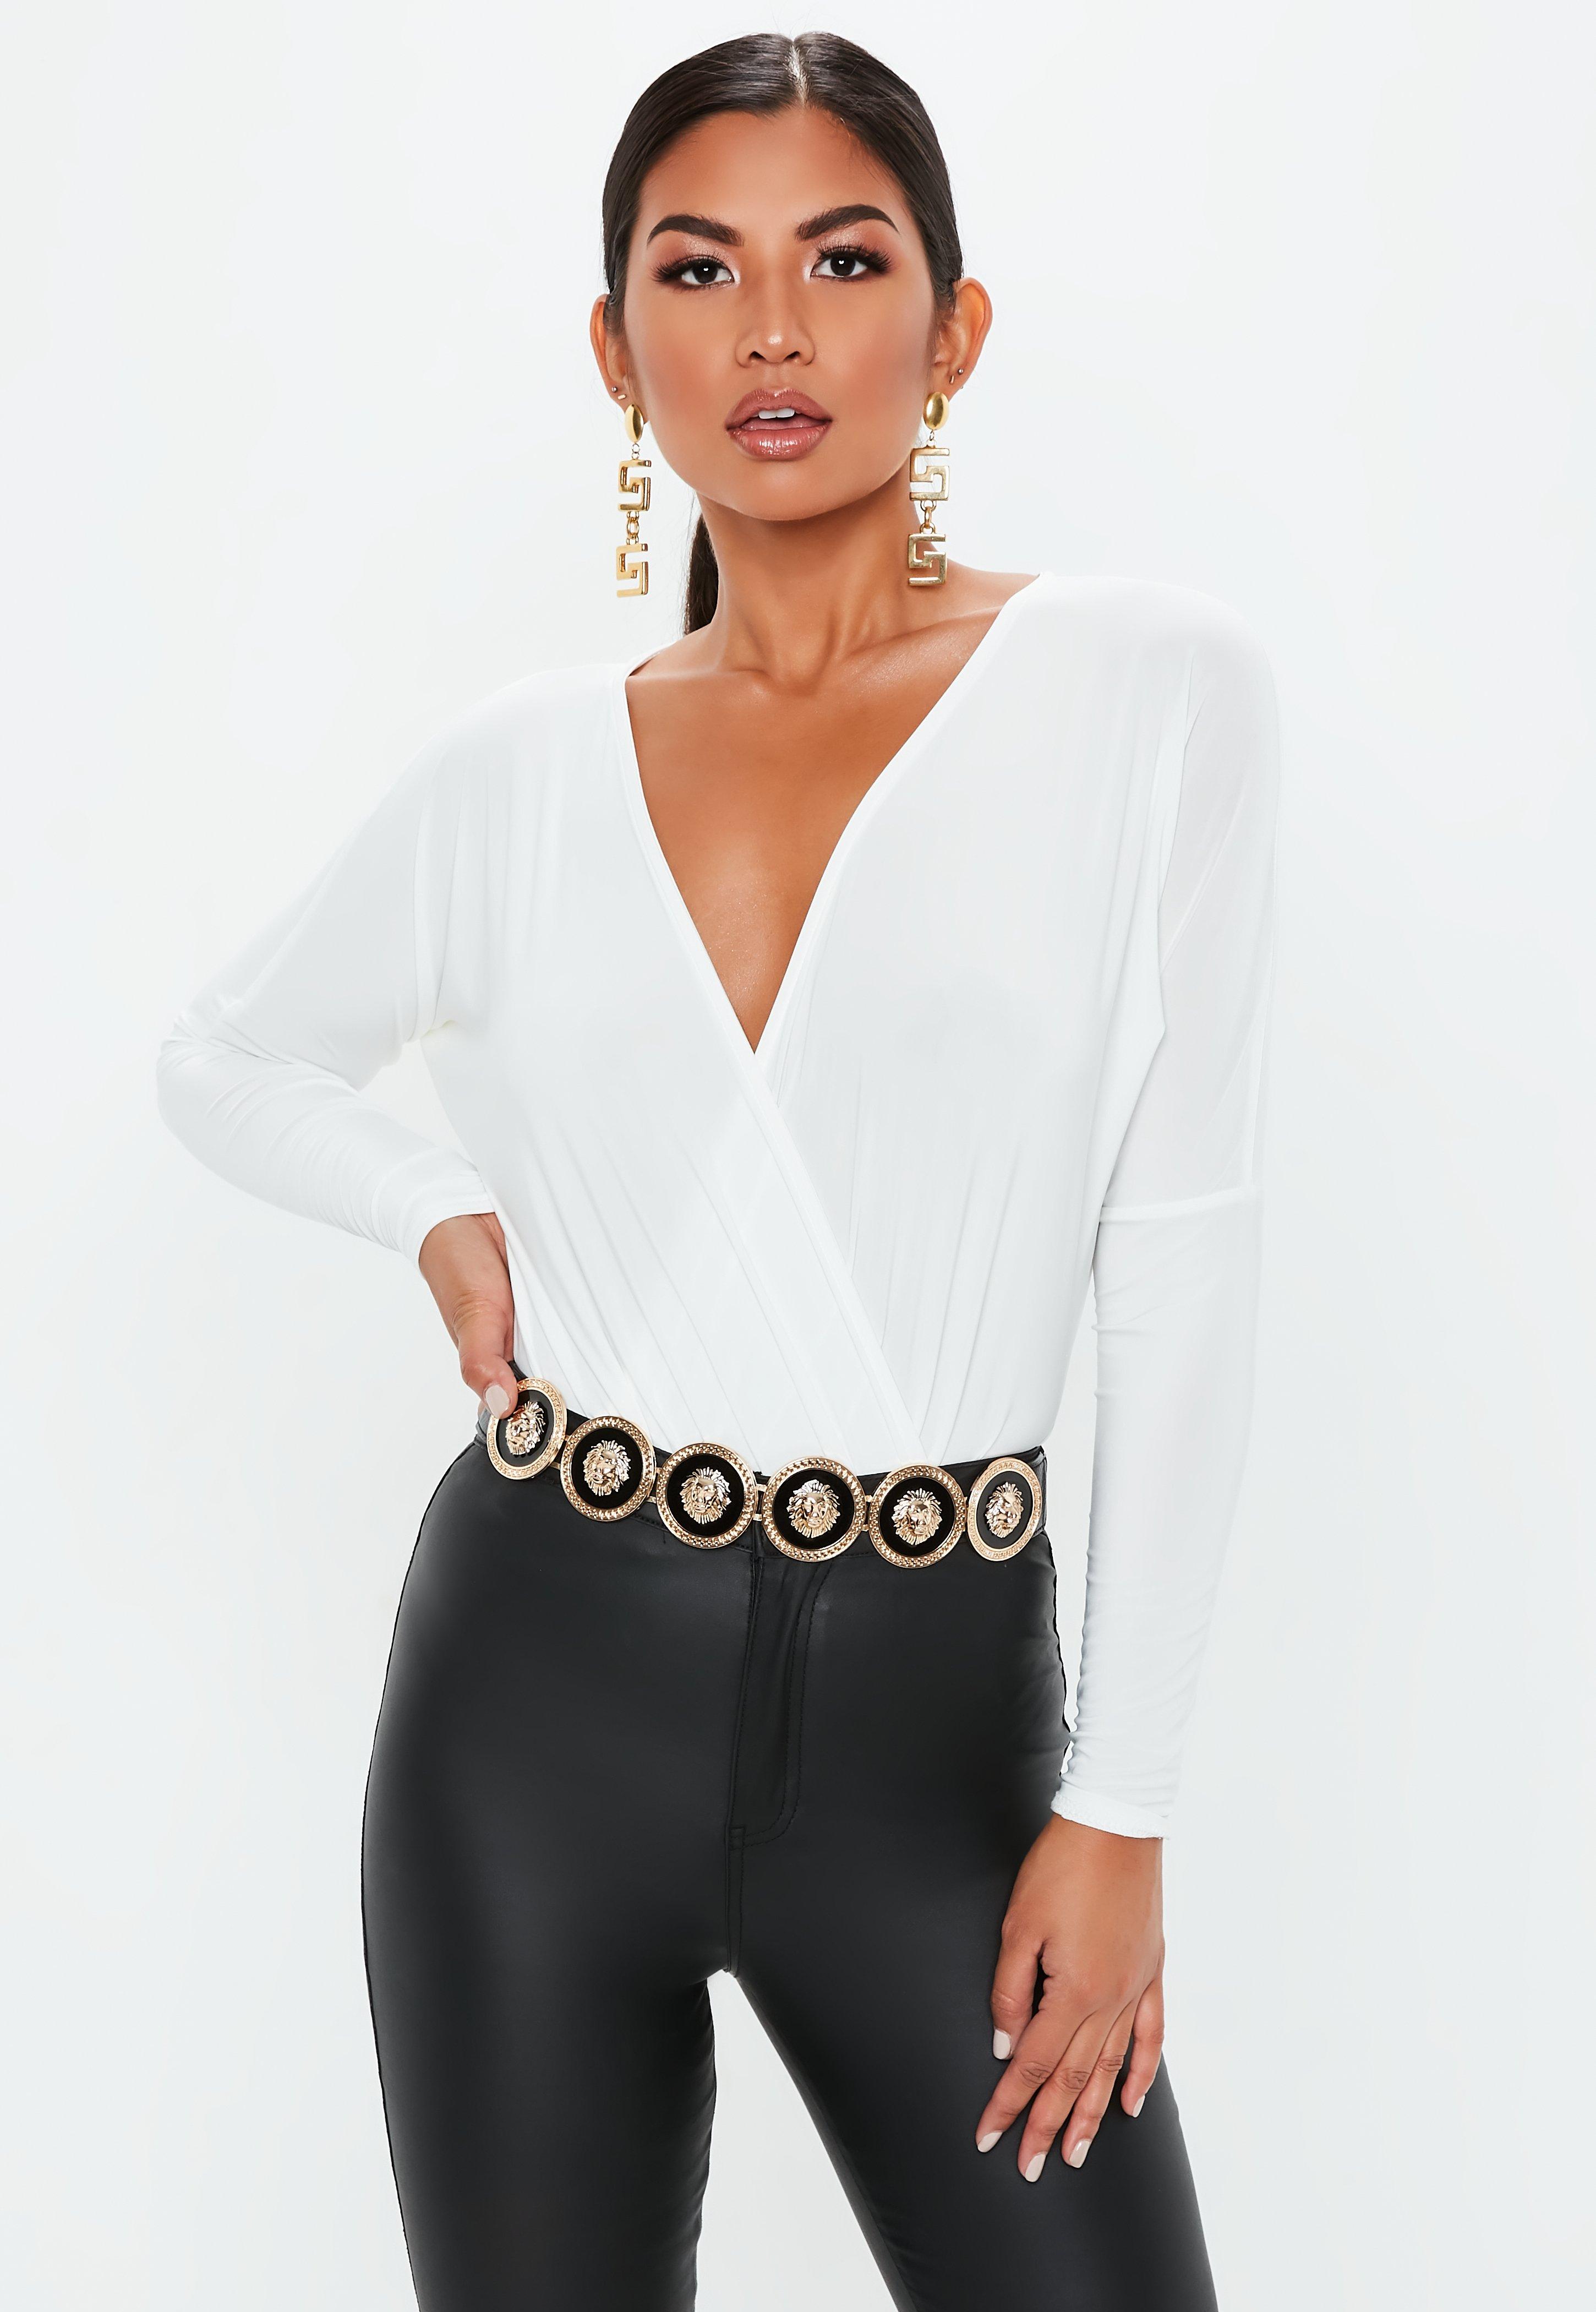 Blouse bodysuits: functionality and elegant designs